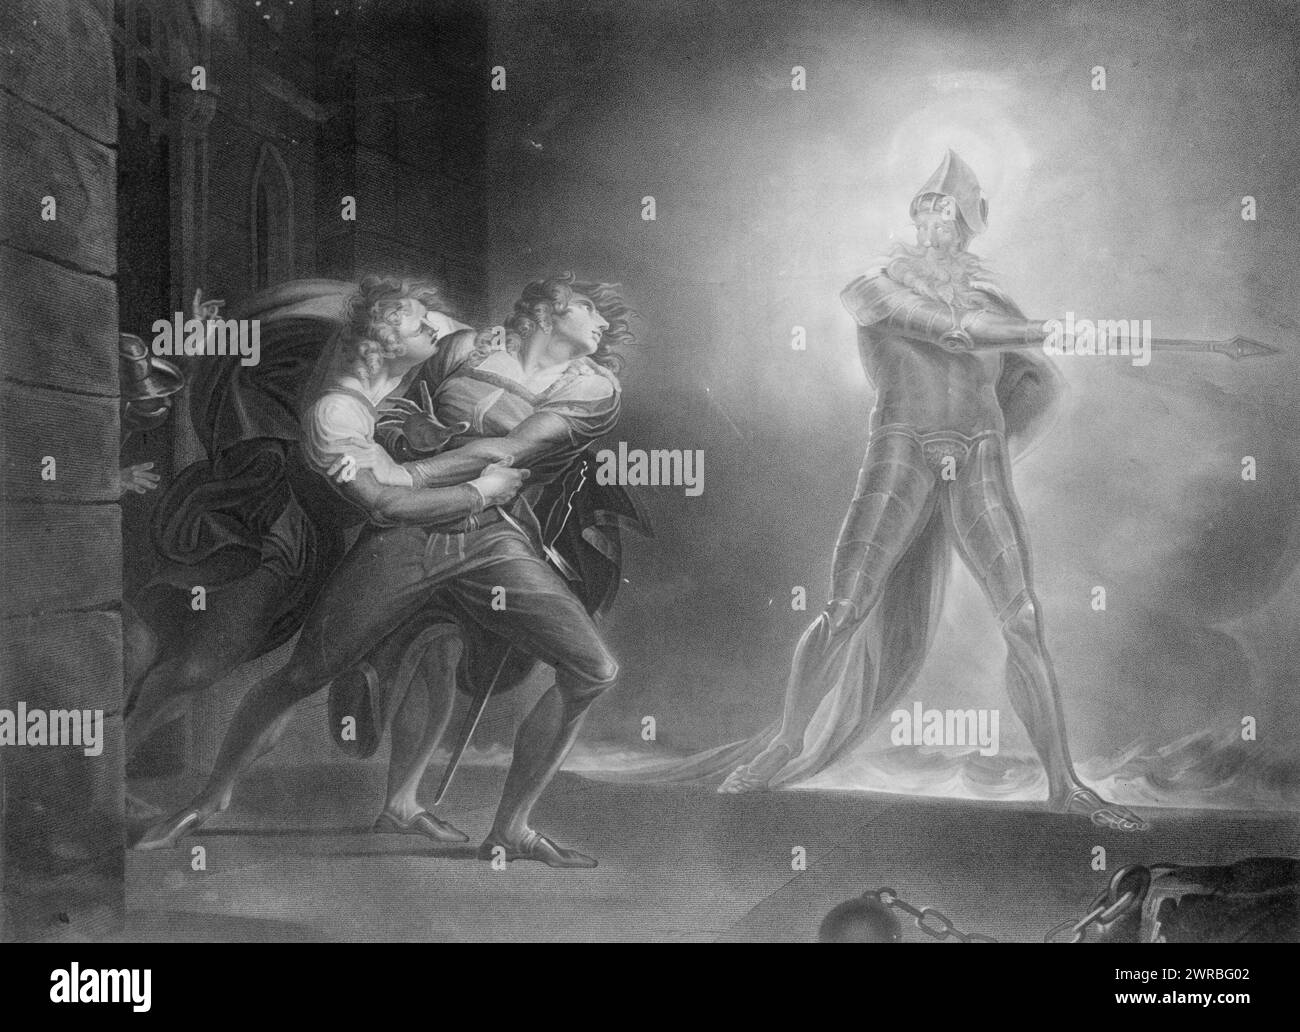 Shakespeare, Hamlet, Prince of Denmark, painted by H. Fuseli R.A., engraved by R. Thew., Act 1, scene 4, from Shakespeare's Hamlet, Prince of Denmark, showing Hamlet, Horatio, Marcellus, and the Ghost, on platform before the Palace of Elsinor., Thew, Robert, 1758-1802, artist, London: published by J. & J. Boydell, 1796., Shakespeare, William, 1564-1616., Hamlet, Engravings, 1790-1800., Engravings, 1790-1800, 1 print: engraving Stock Photo